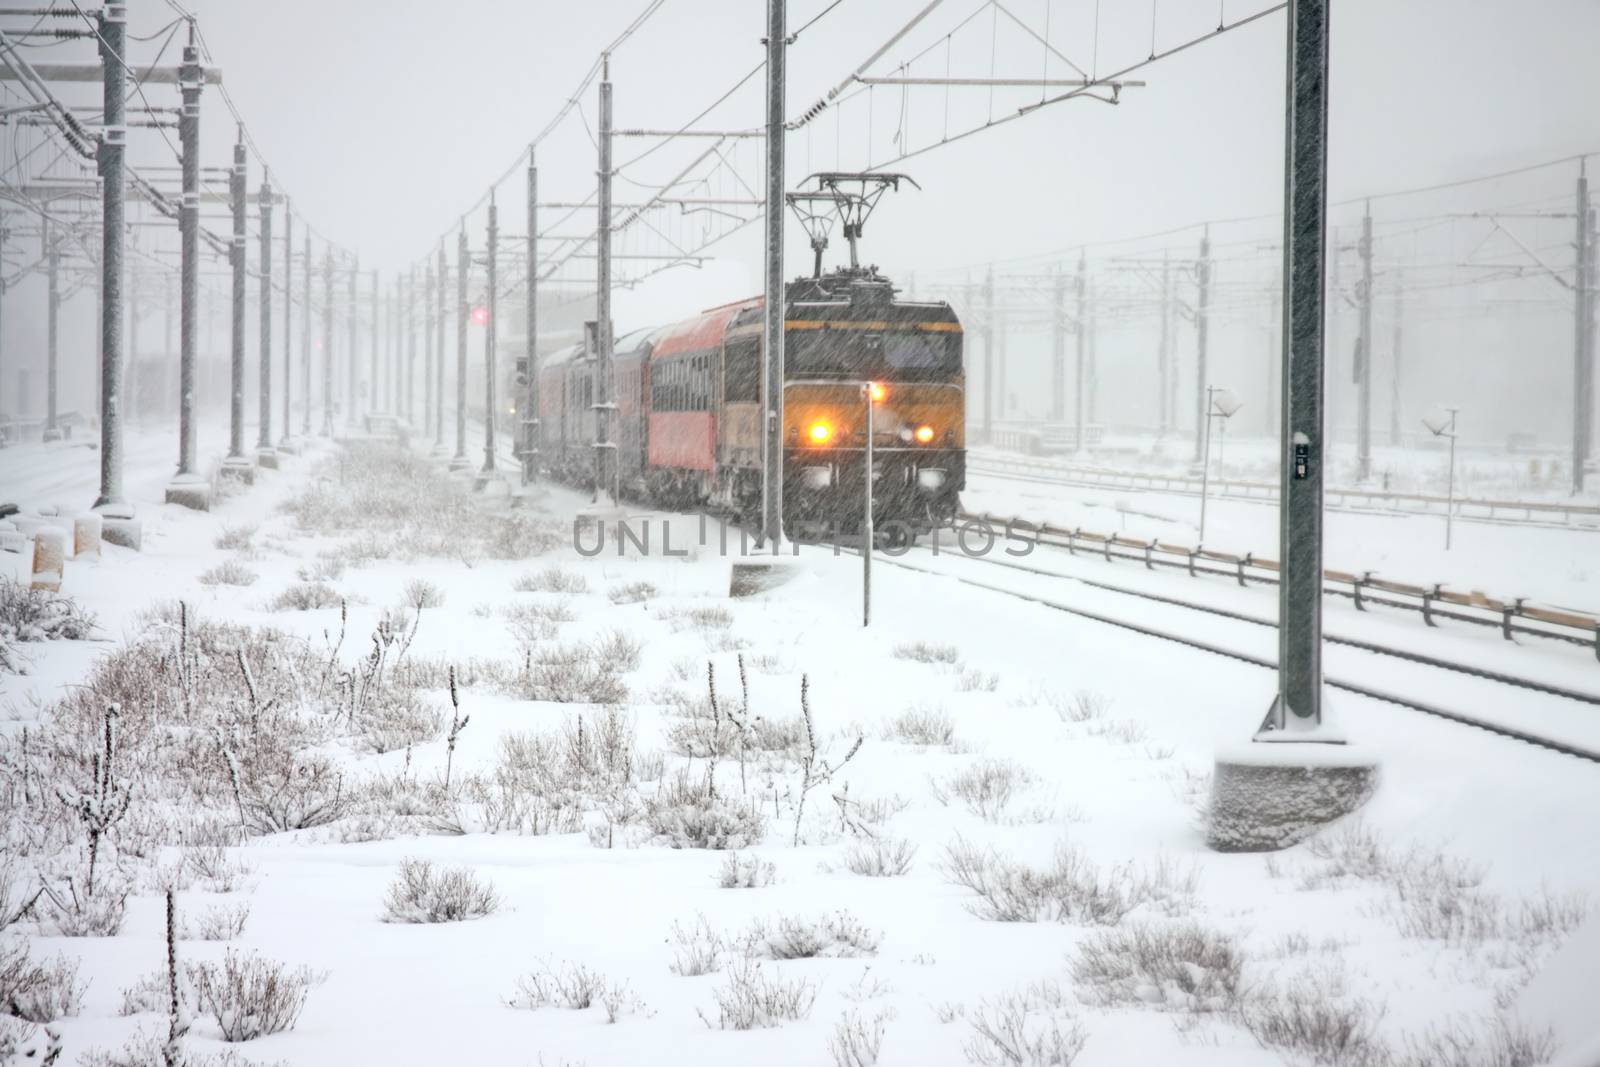 Train driving in snowstorm in winter in the Netherlands by devy